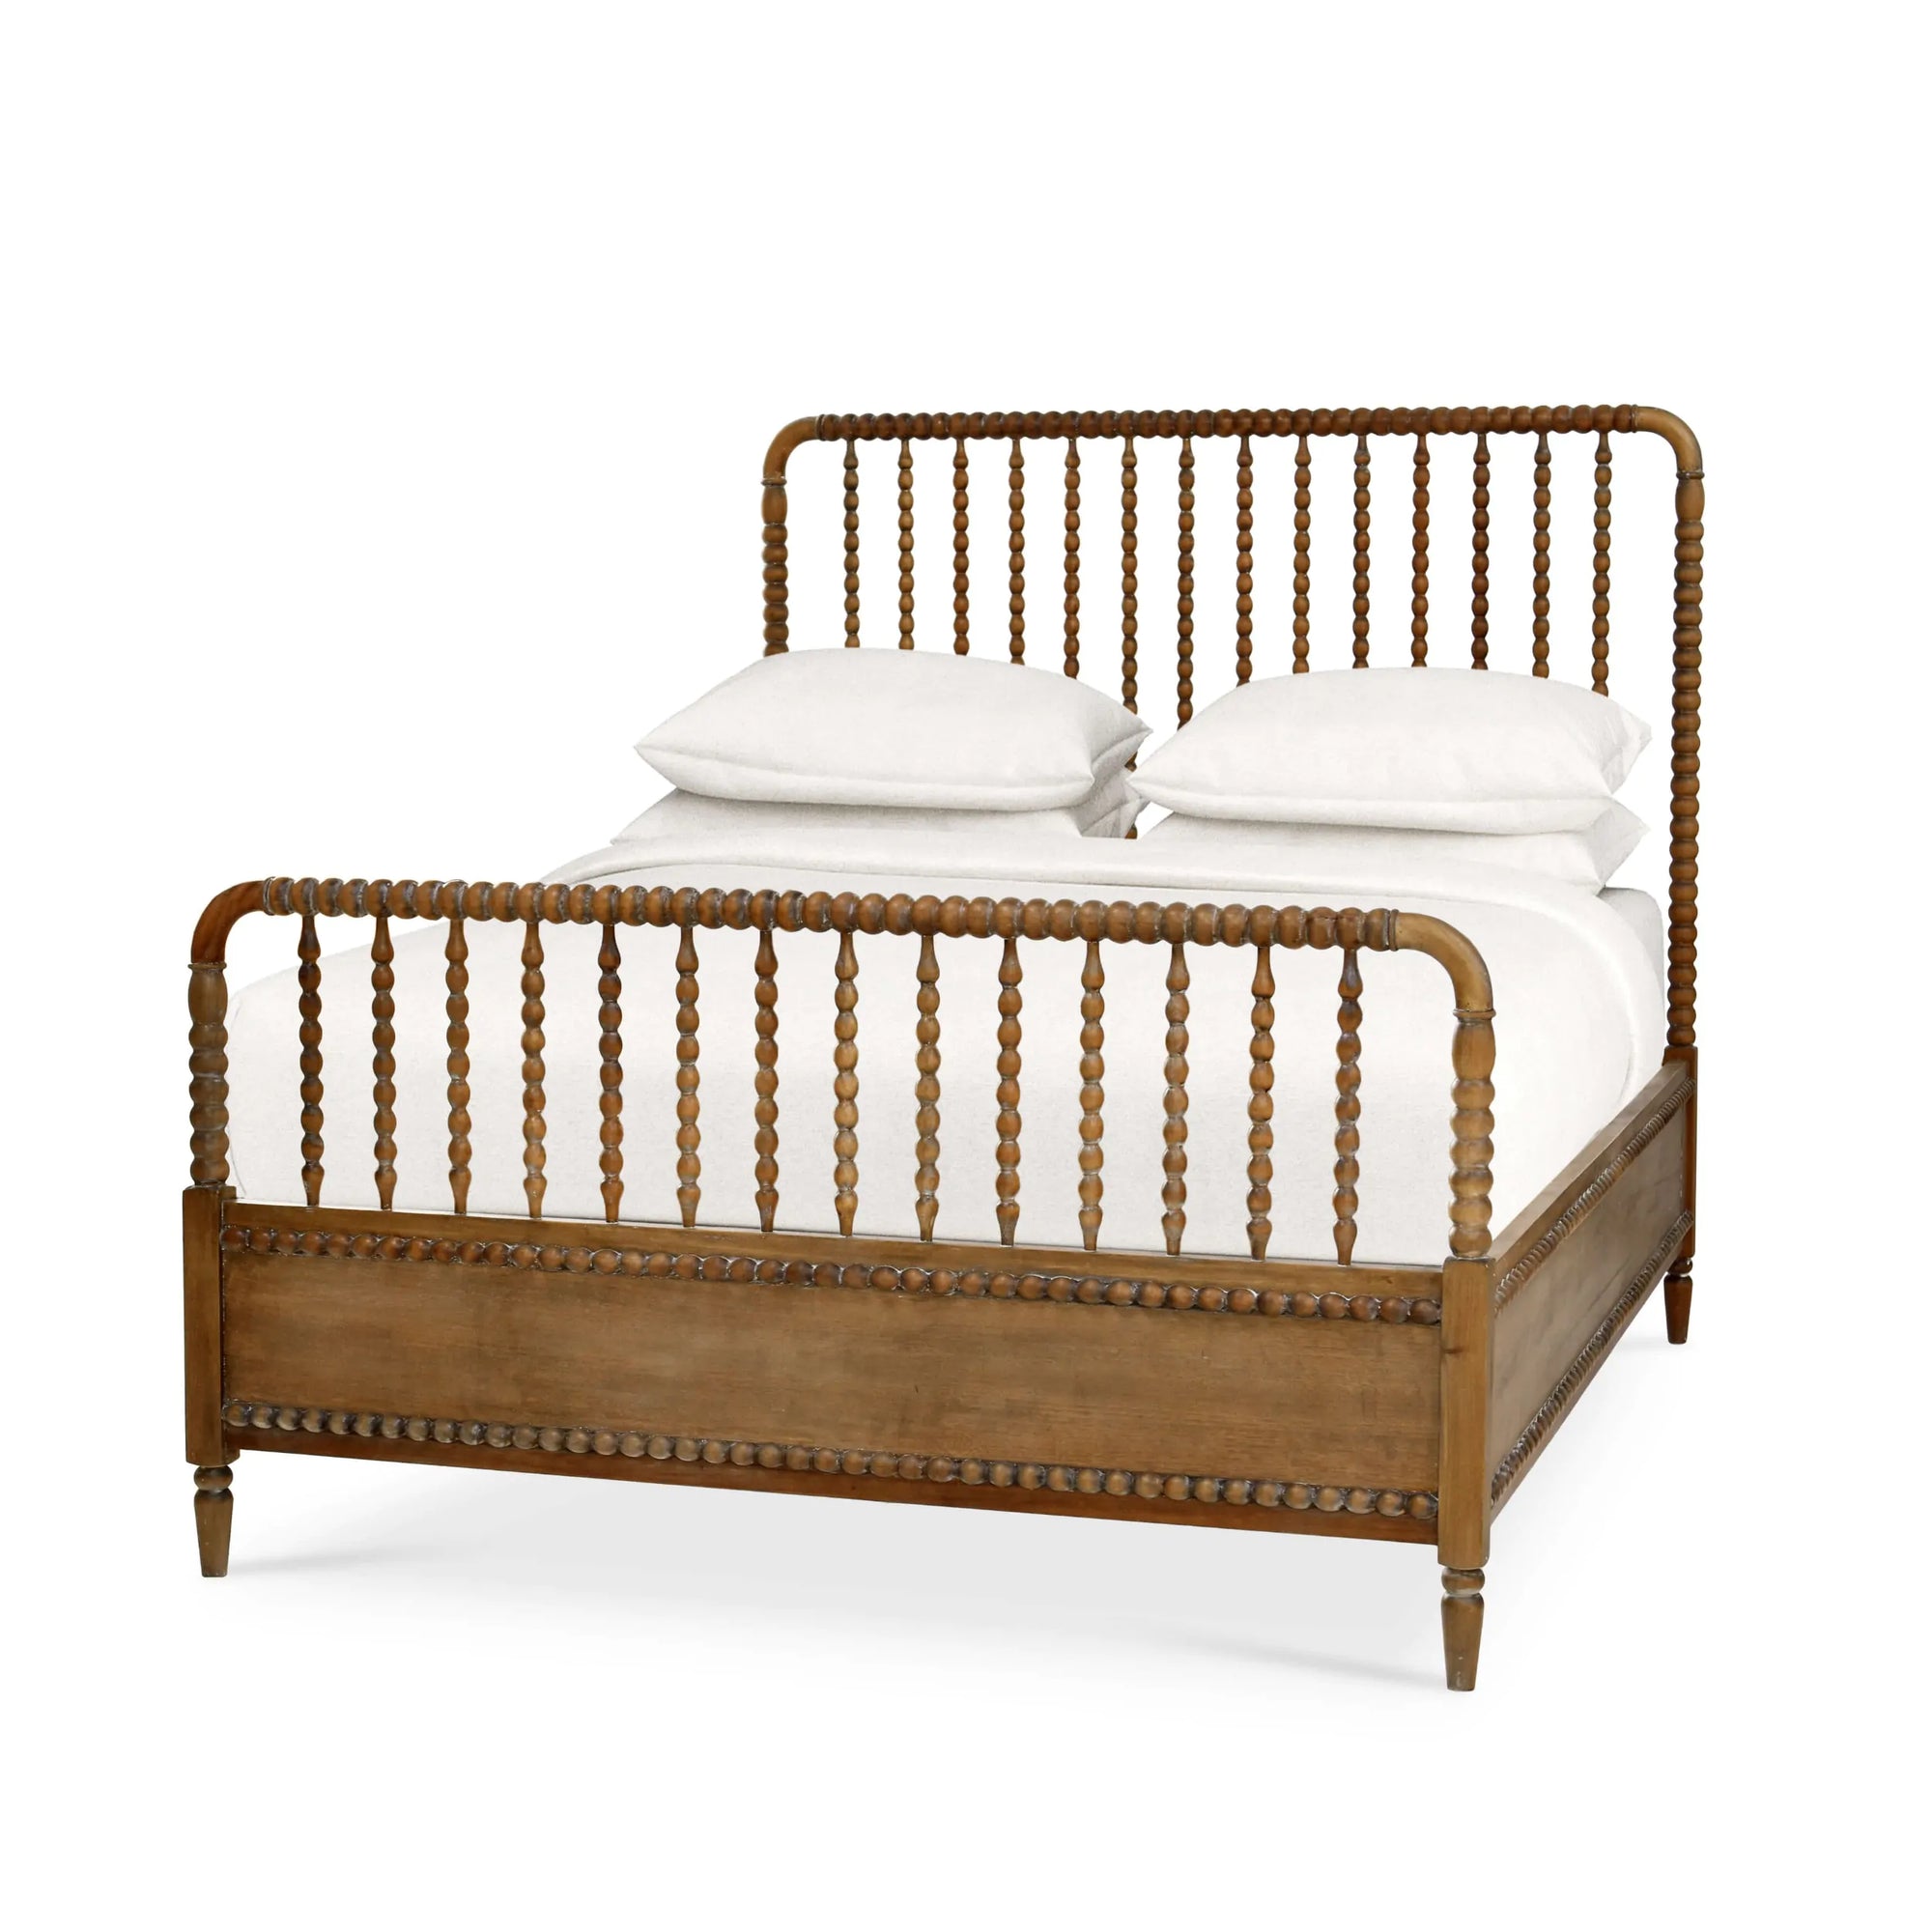 Cholet Bed Queen Straw Wash